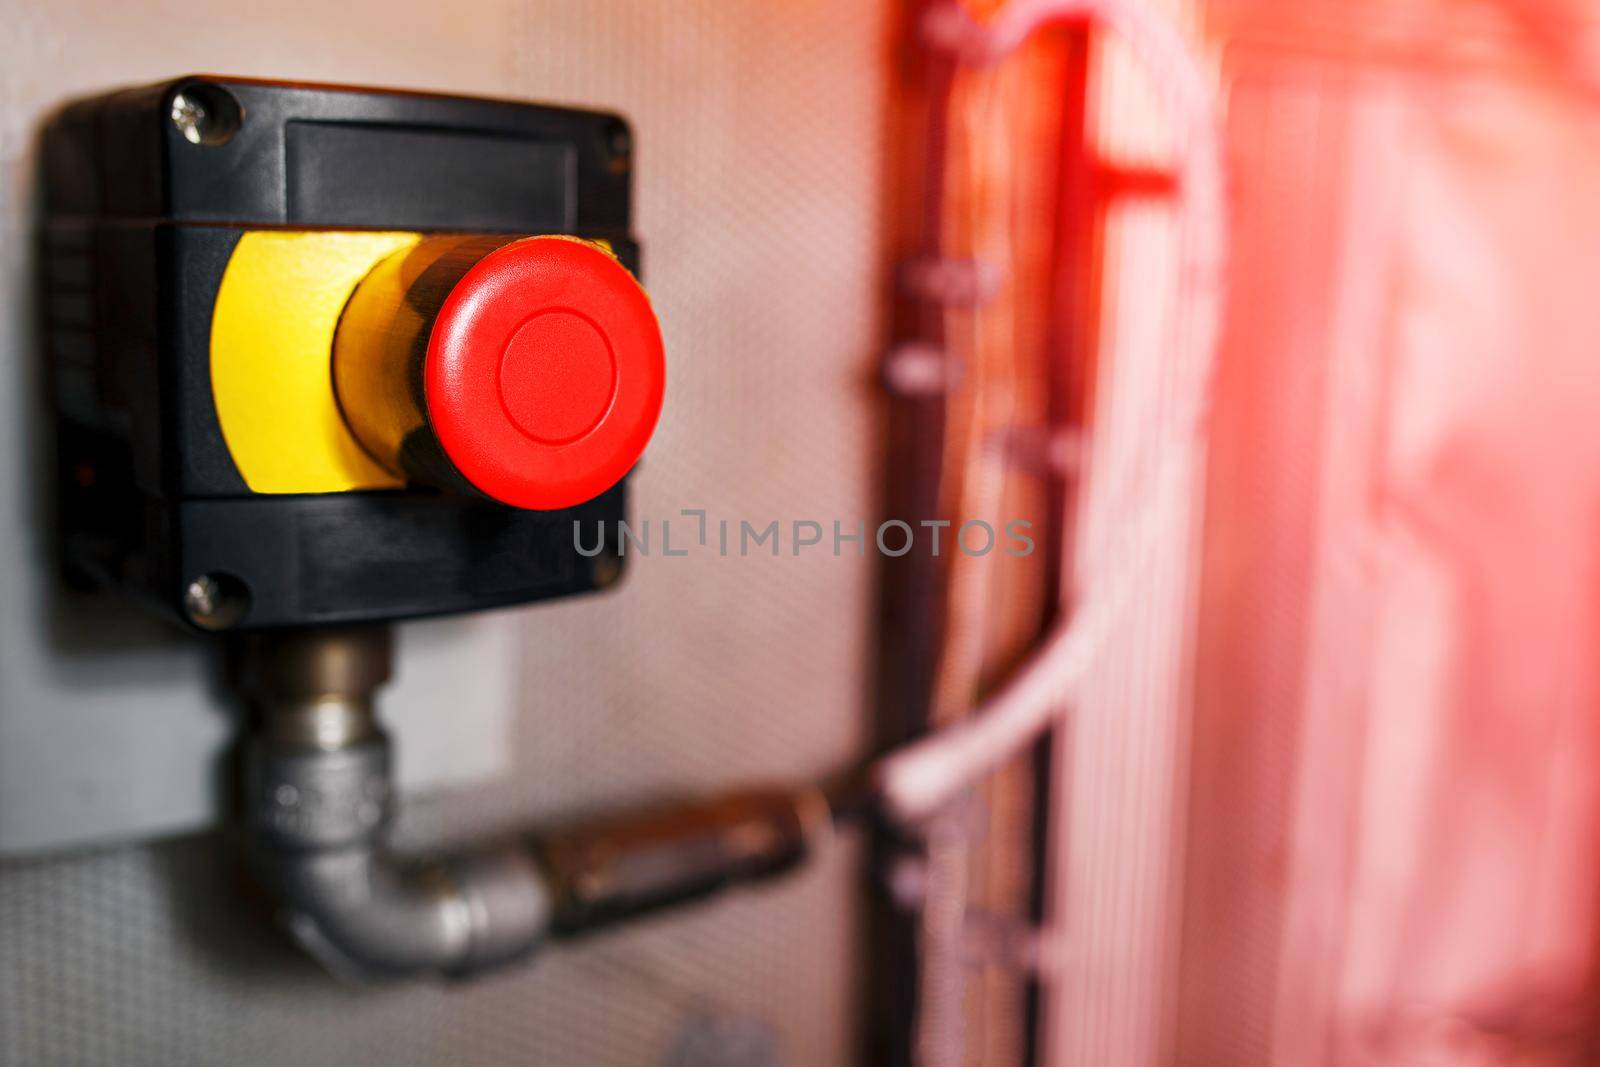 Big Red emergency button or stop button for manual pressing. STOP button for industrial equipment, emergency stop. Red light. At the factory and industrial facility. Concept